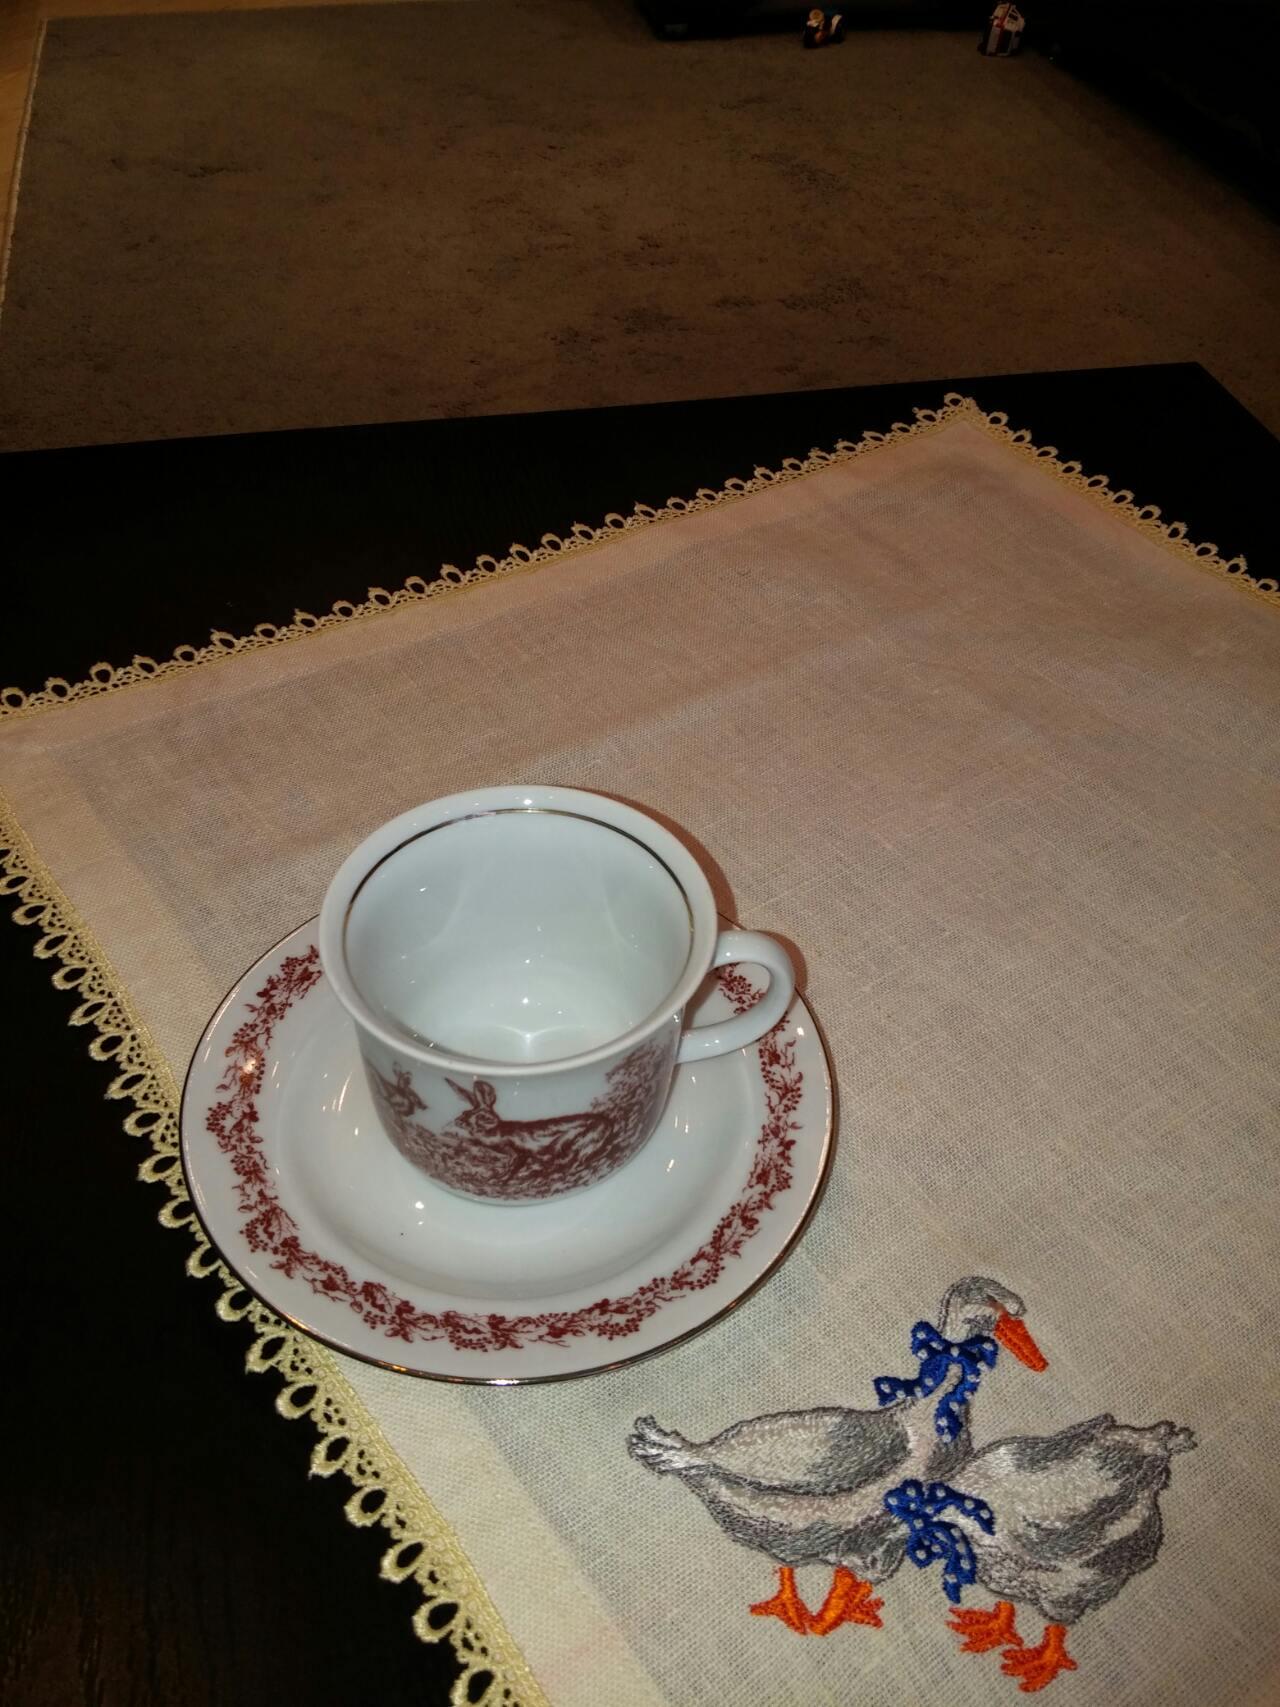 Napkin with family of geese free embroidery design